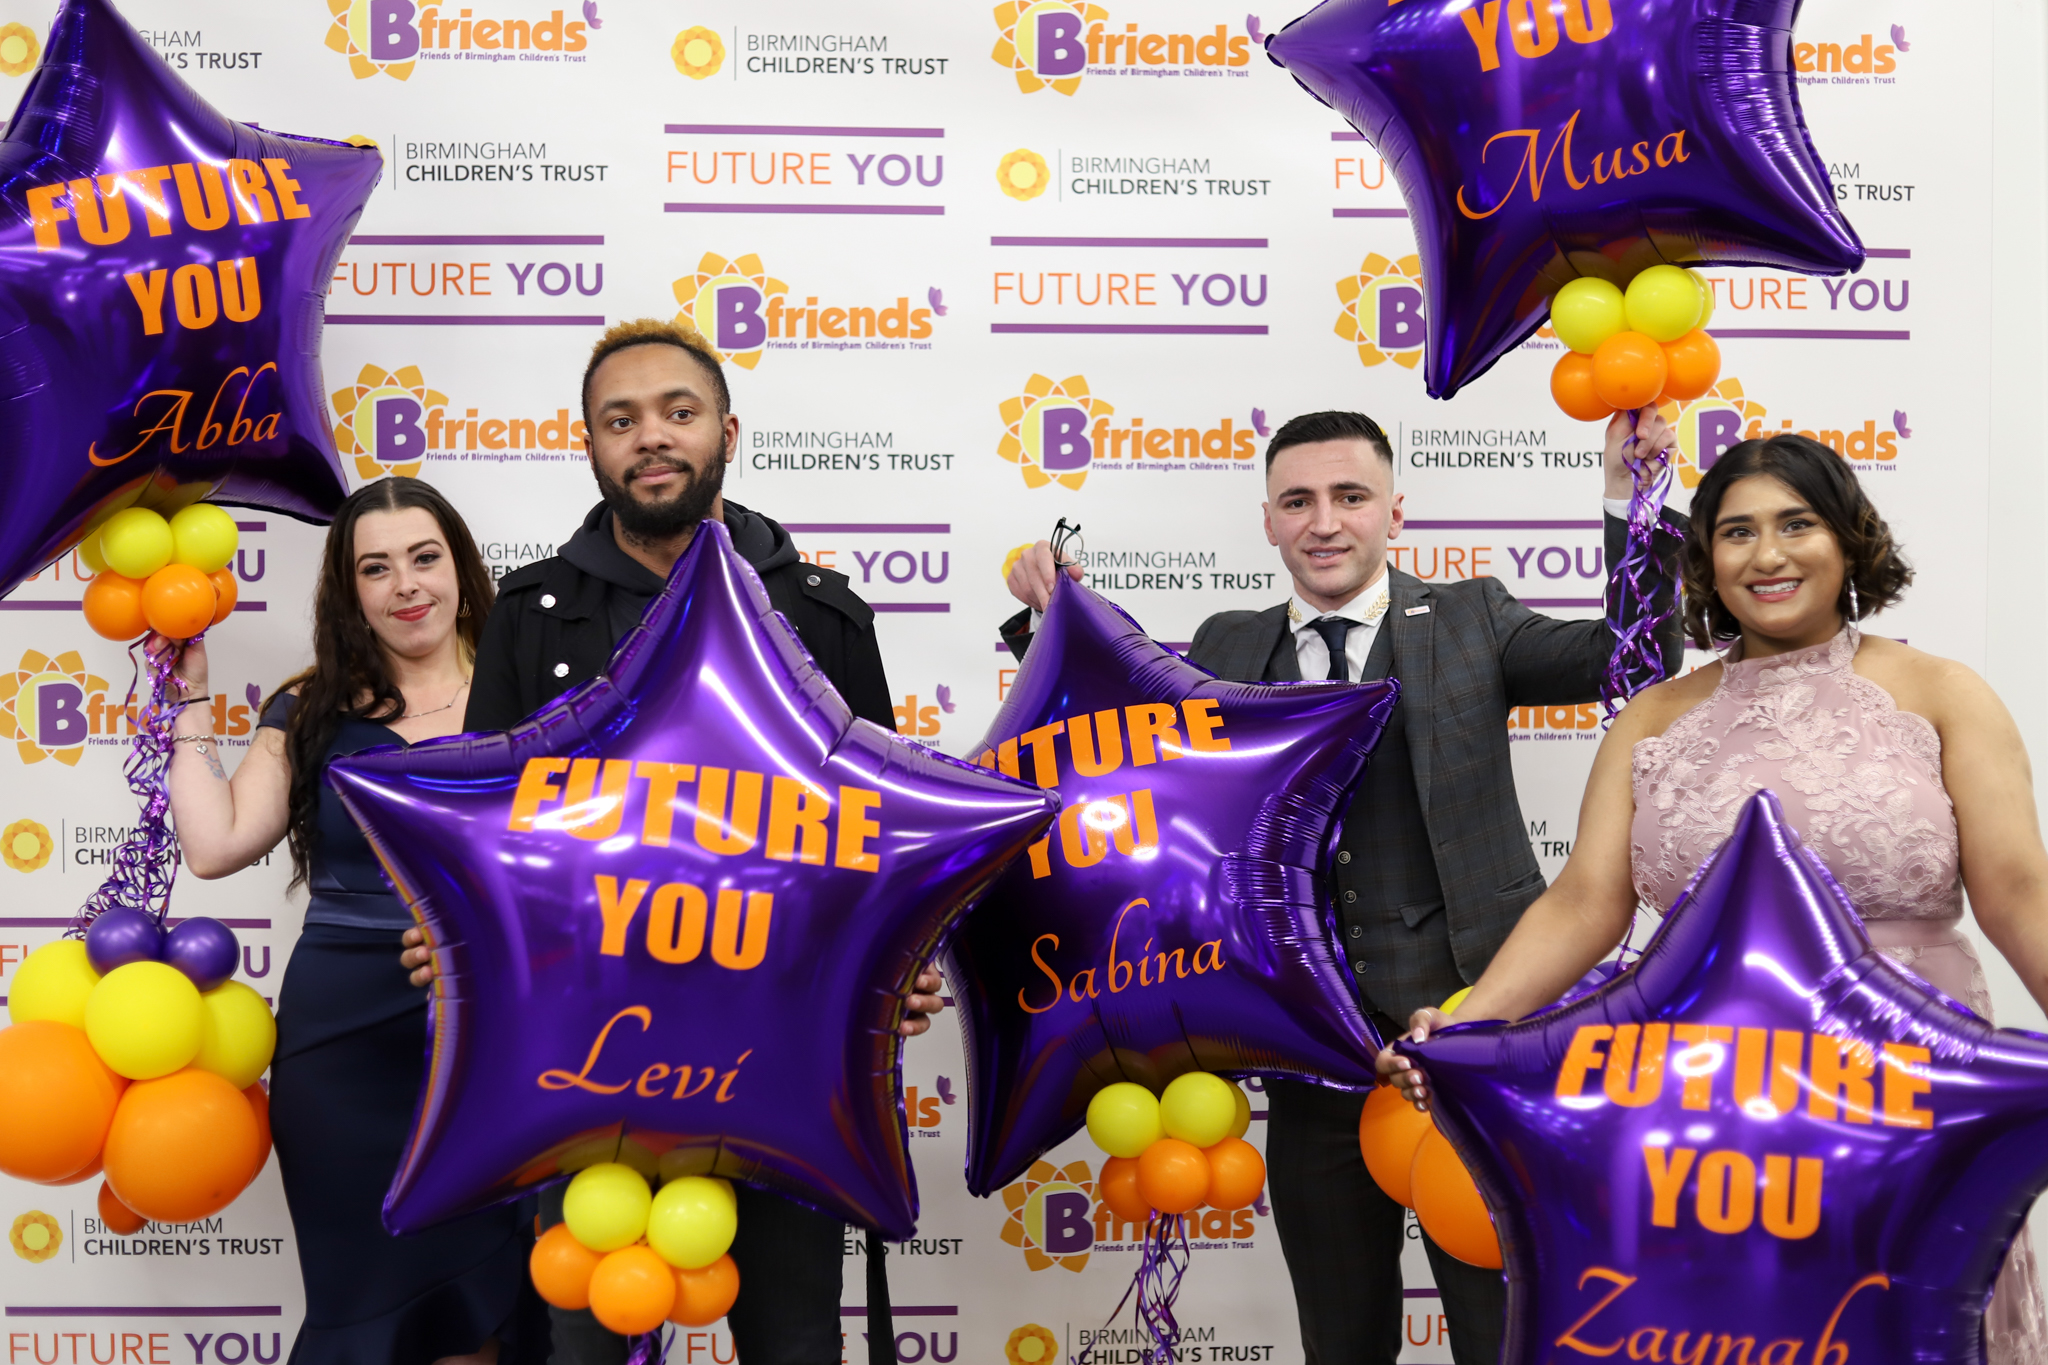 Four young people posing with purple and orange balloons